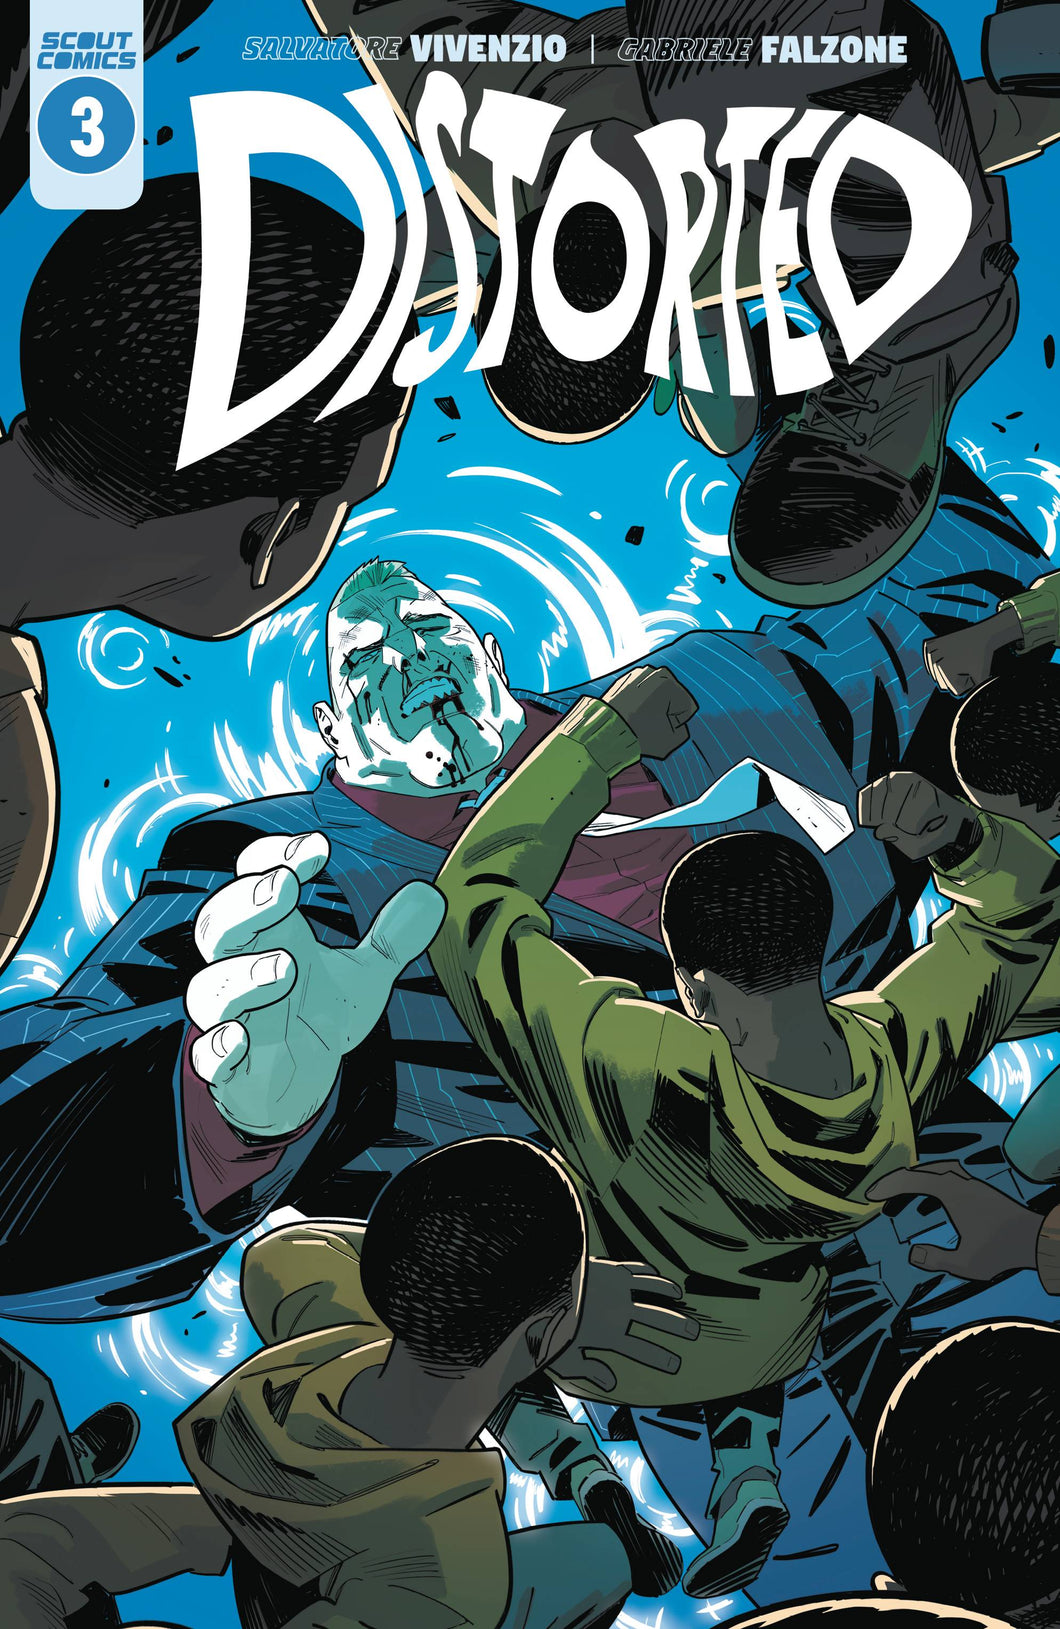 Distorted #3 (Cover A - Falzone)